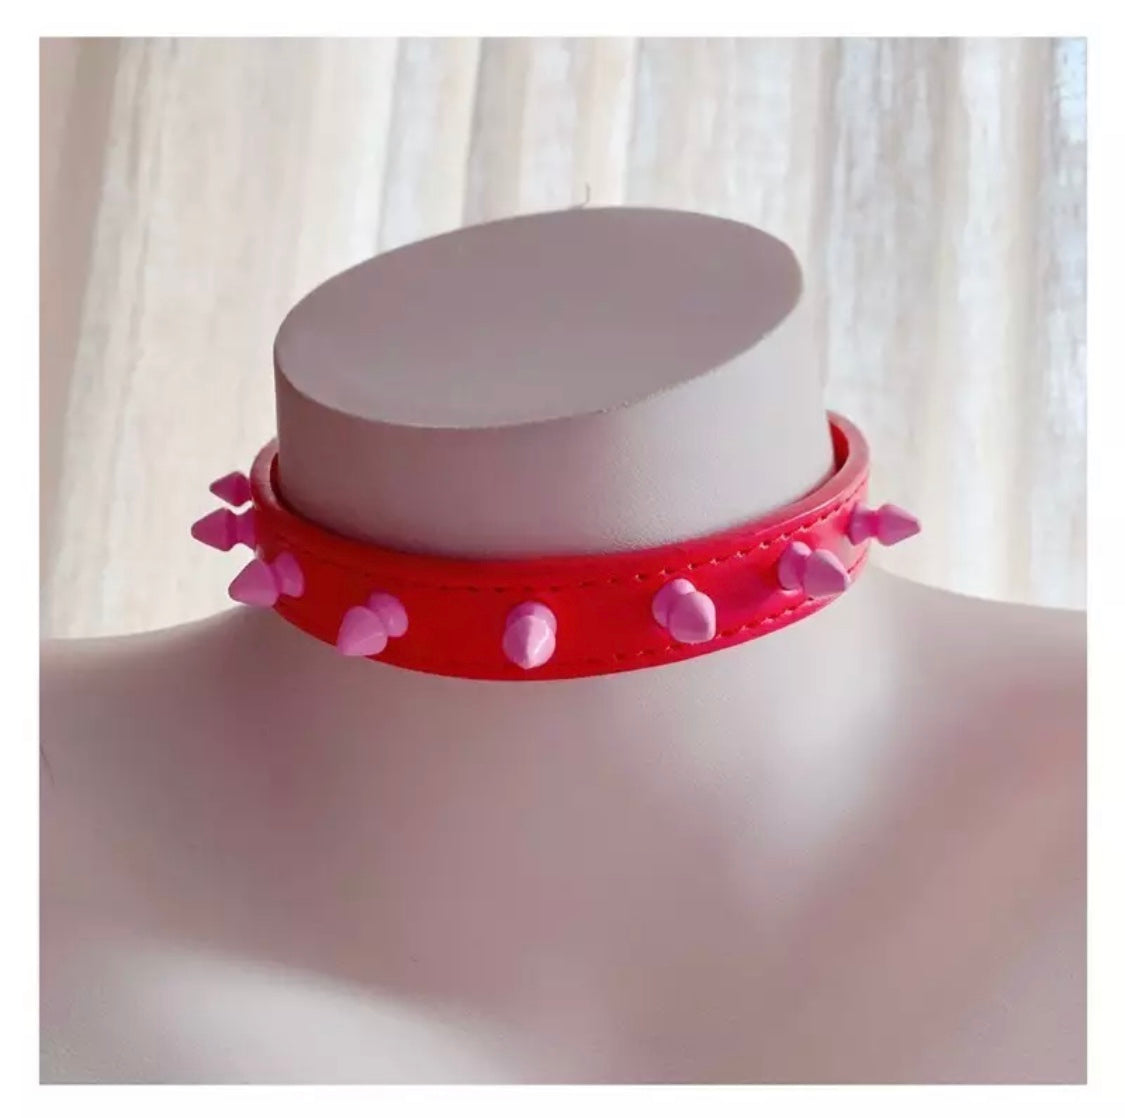 DDLGVERSE Spiked Pastel Collar Red